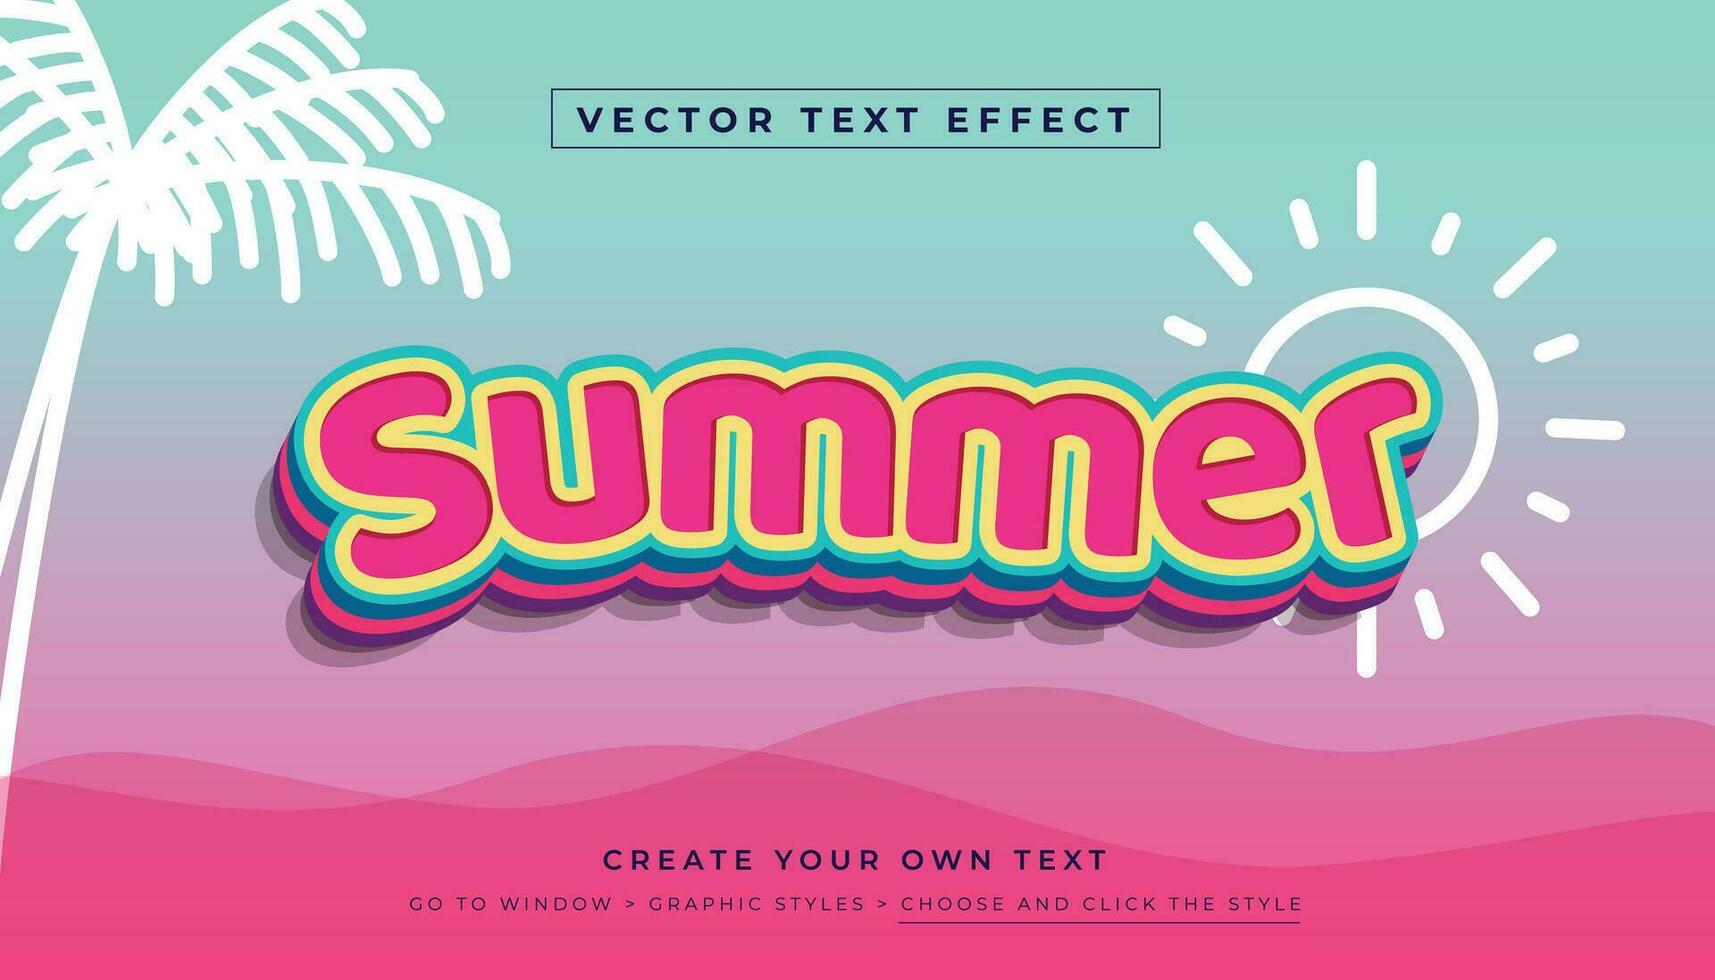 Editable vector 3D pink summer text effect. Beach holiday graphic style